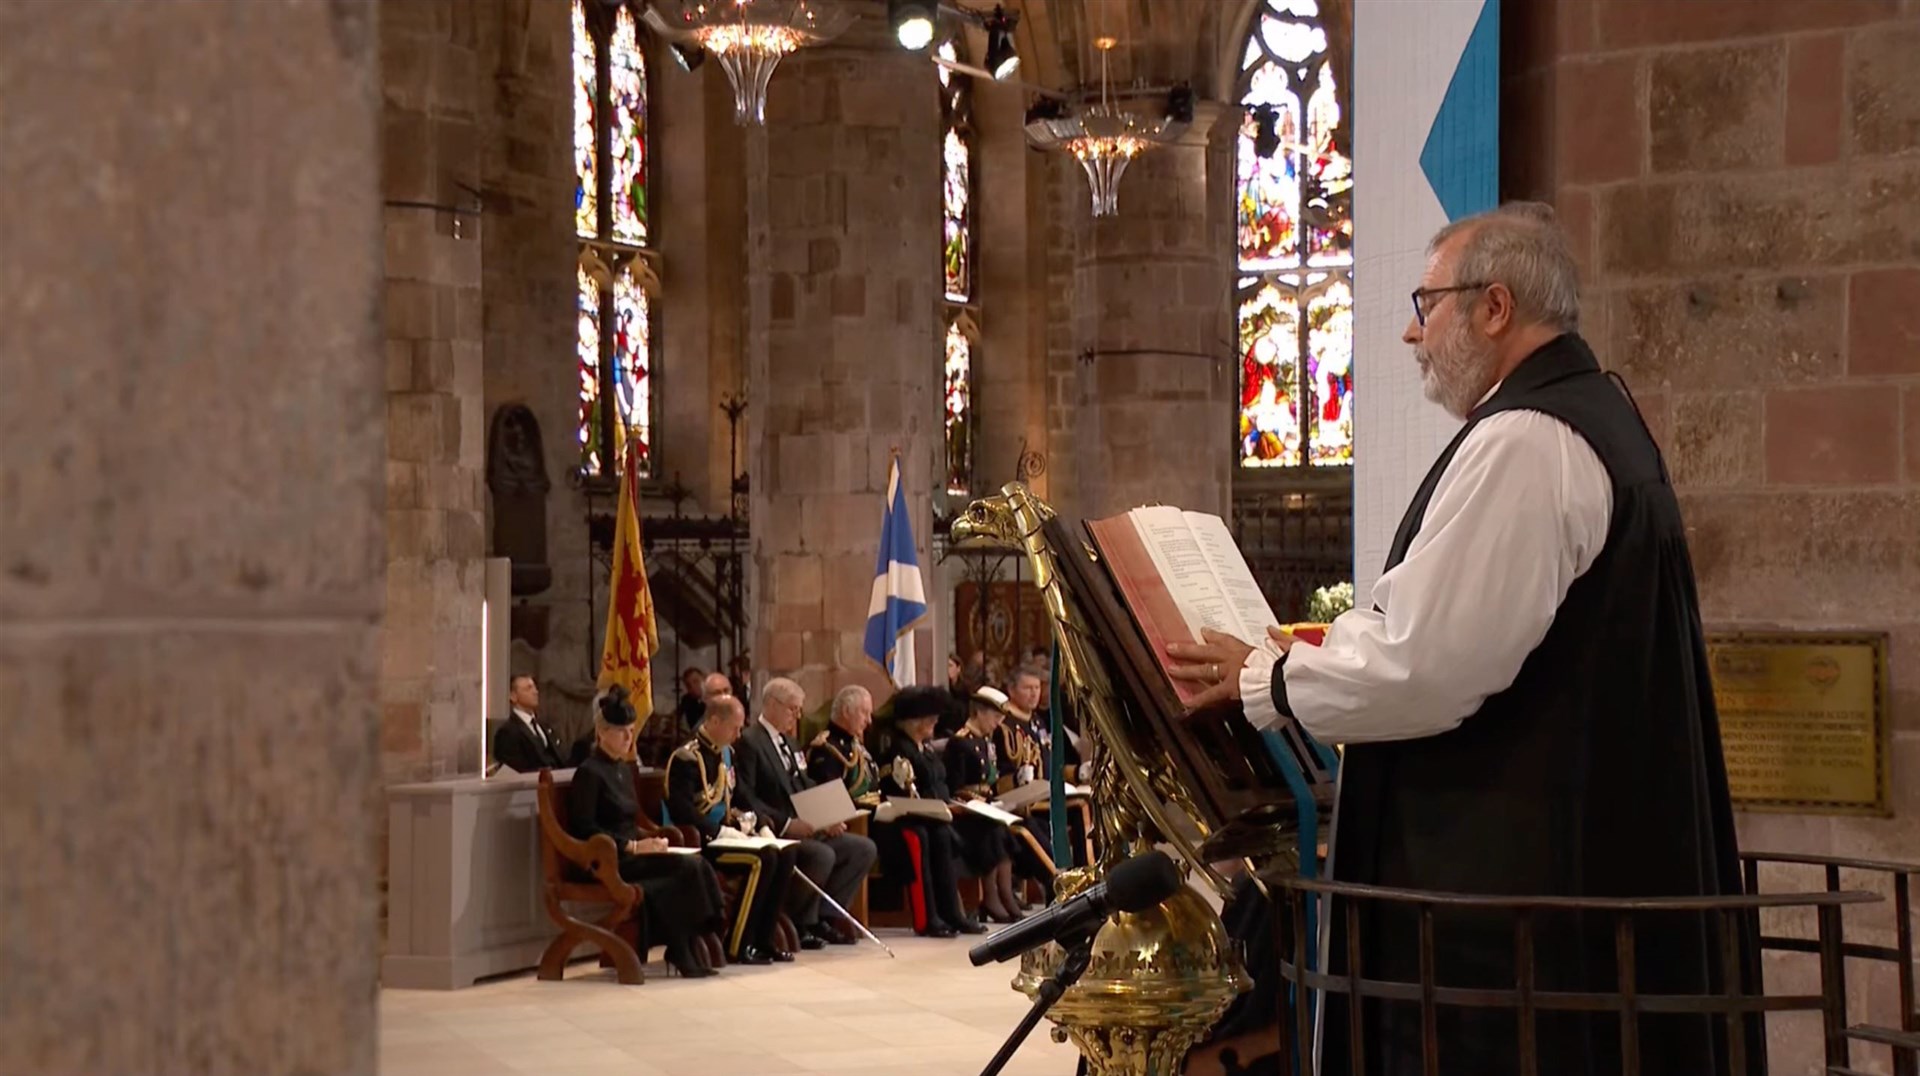 Bishop Mark Strange at the service of thanksgiving for the life of The Queen held at St Giles Cathedral in Edinburgh and attended by members of the royal family including King Charles III.